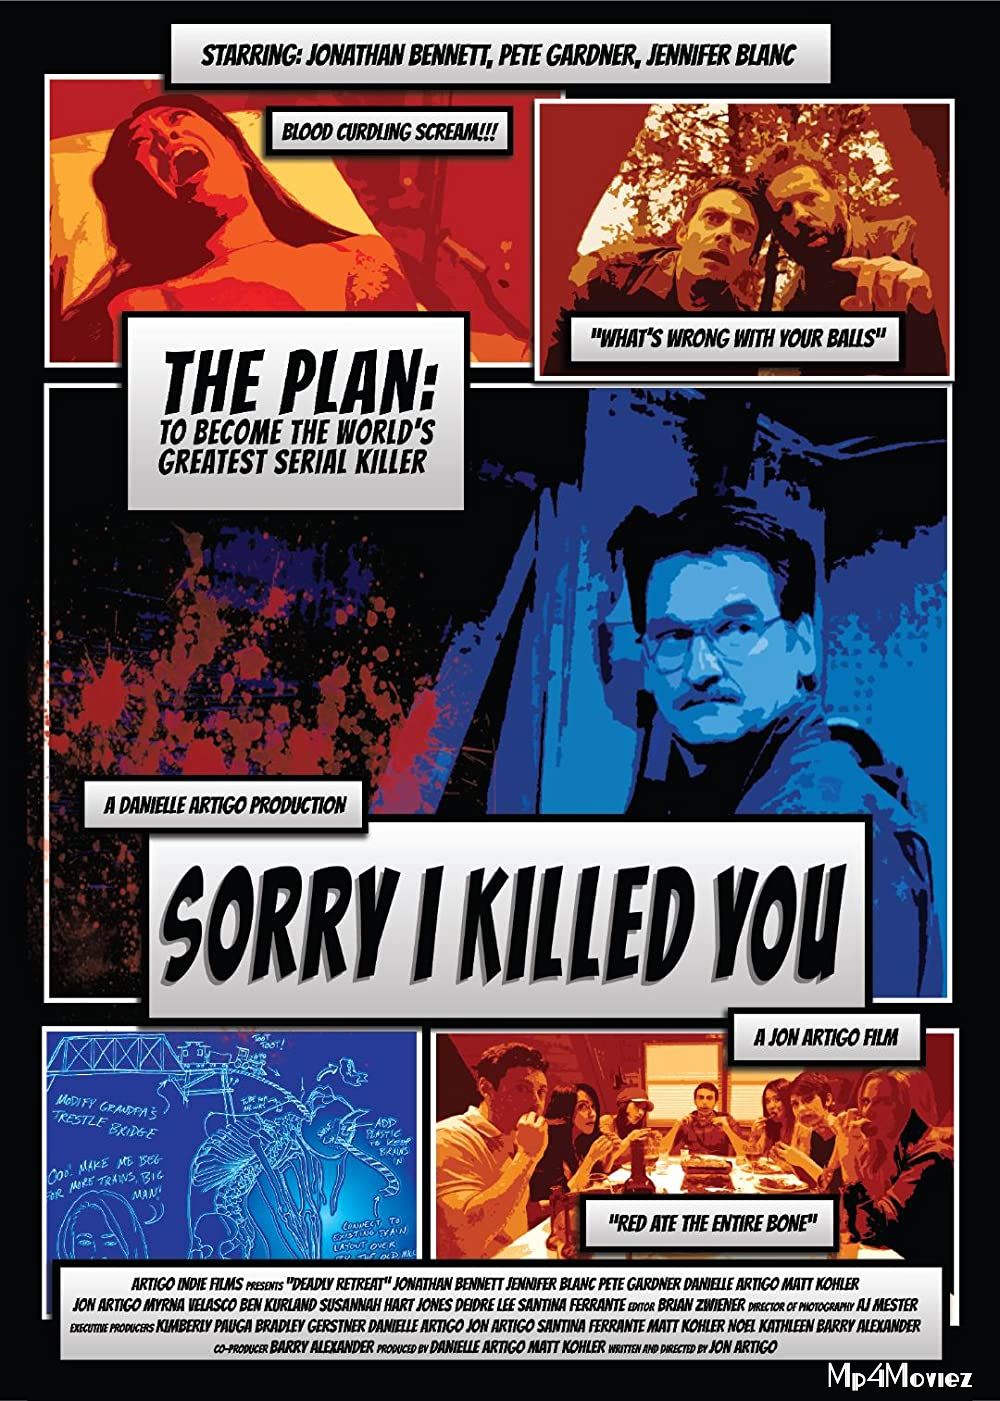 Sorry I Killed You 2020 English Full Movie download full movie